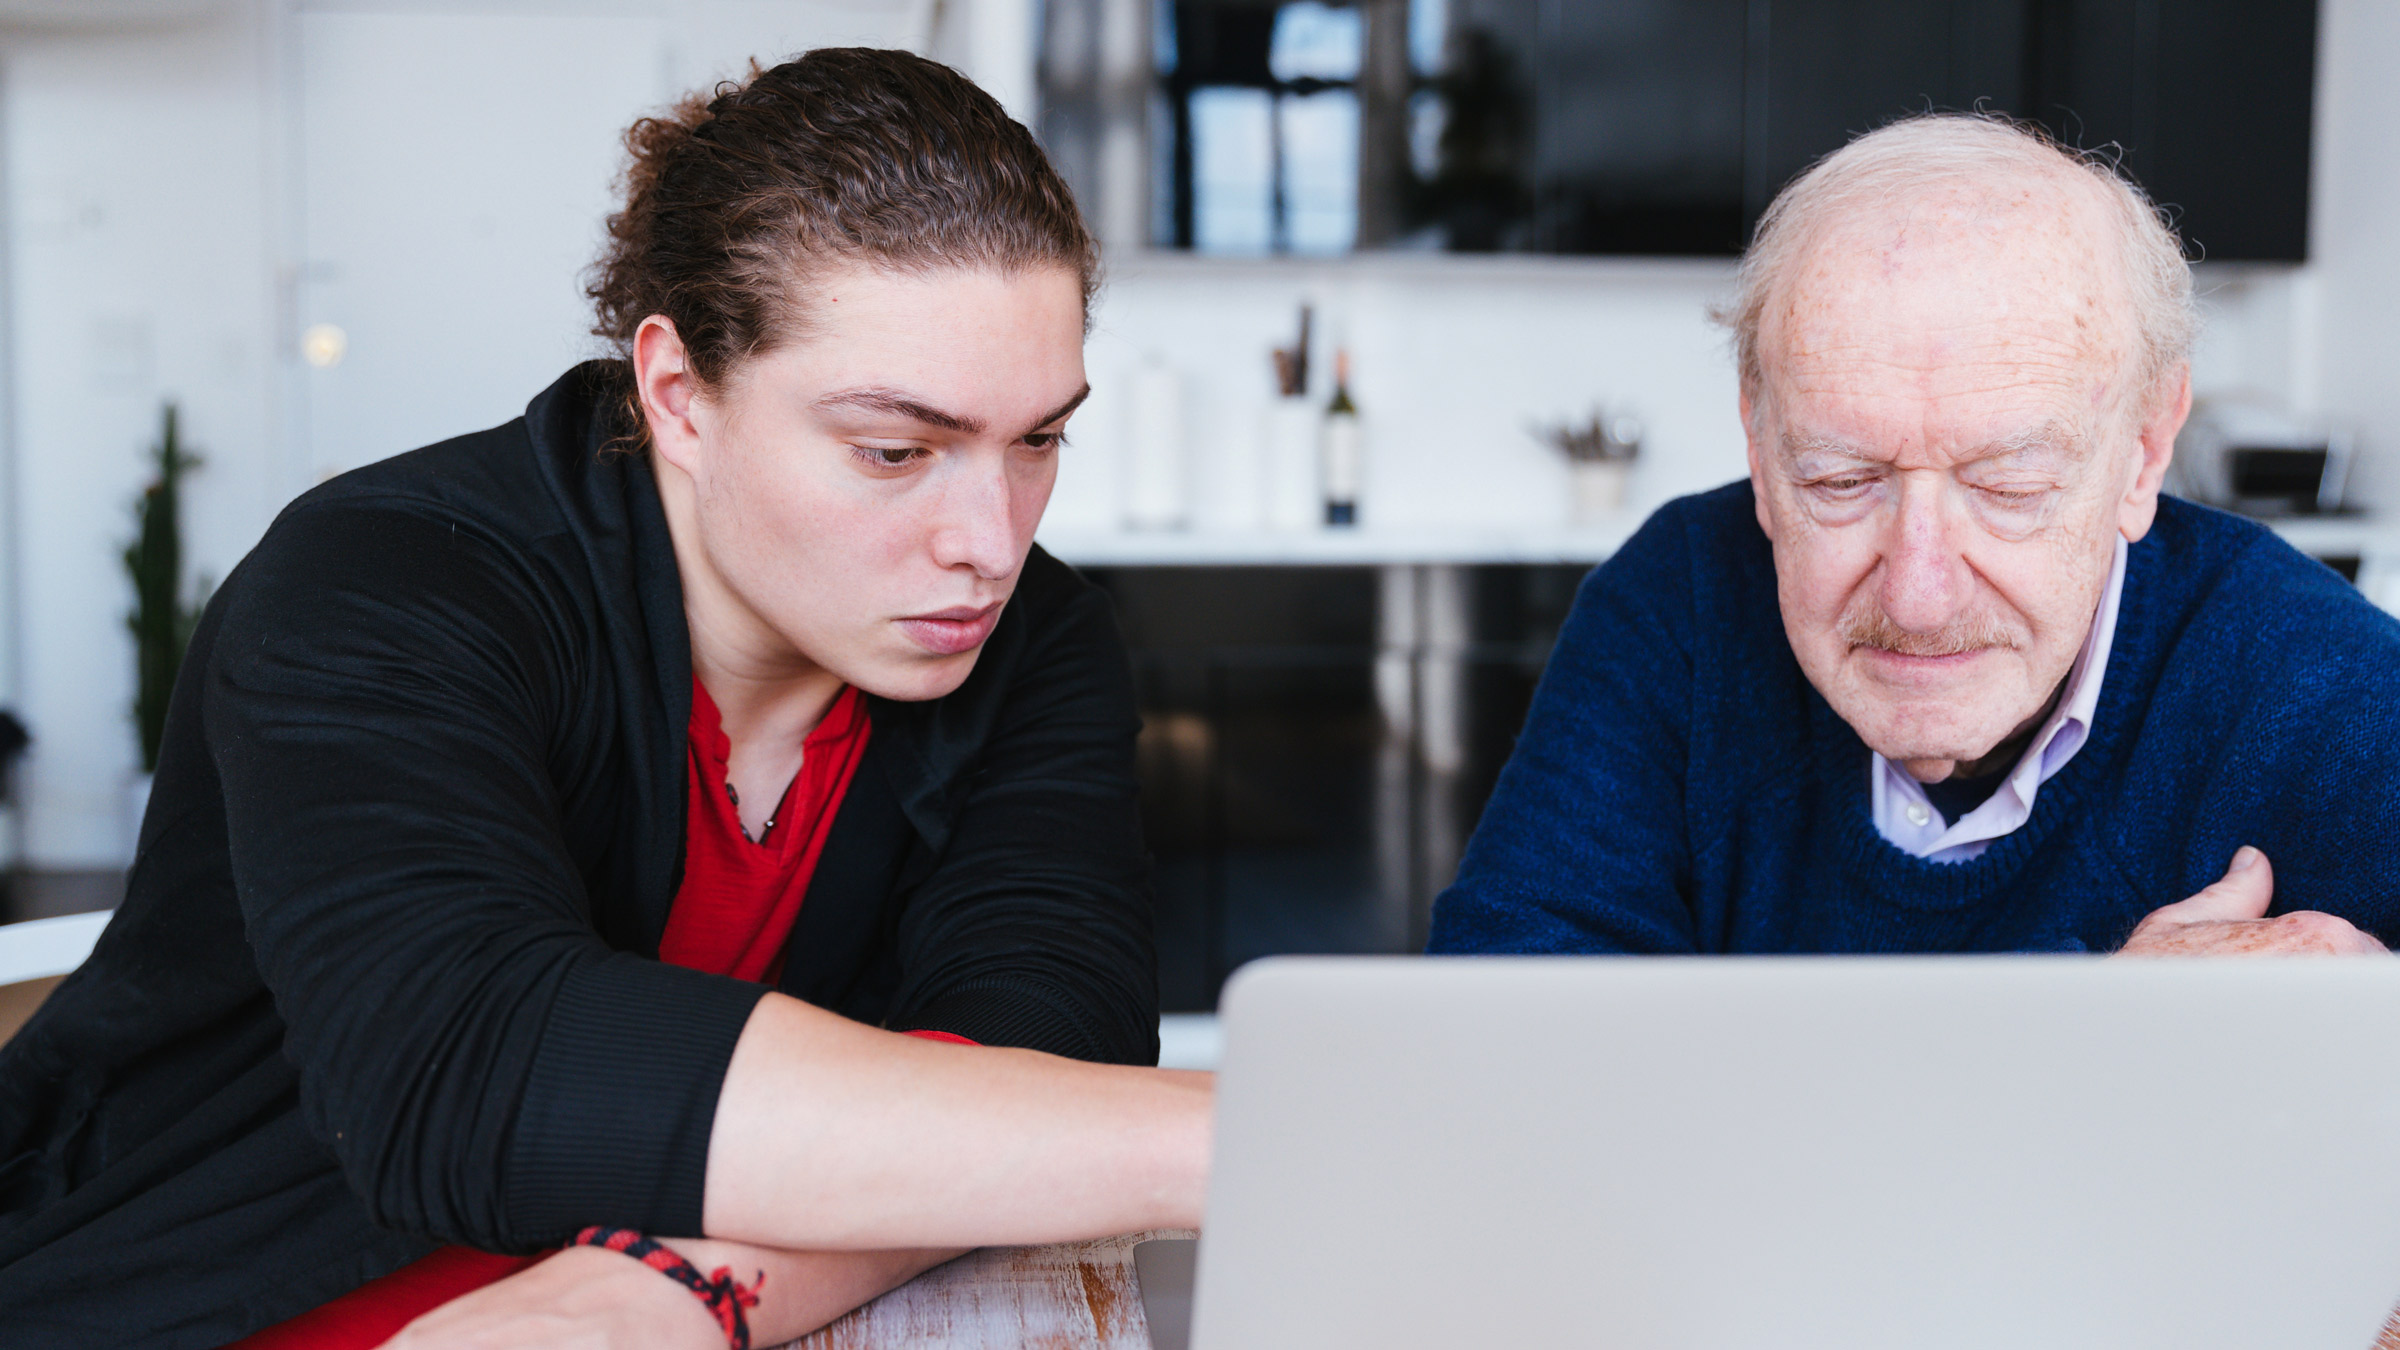 Medicare: young adult helping grandparent with laptop 1371126555